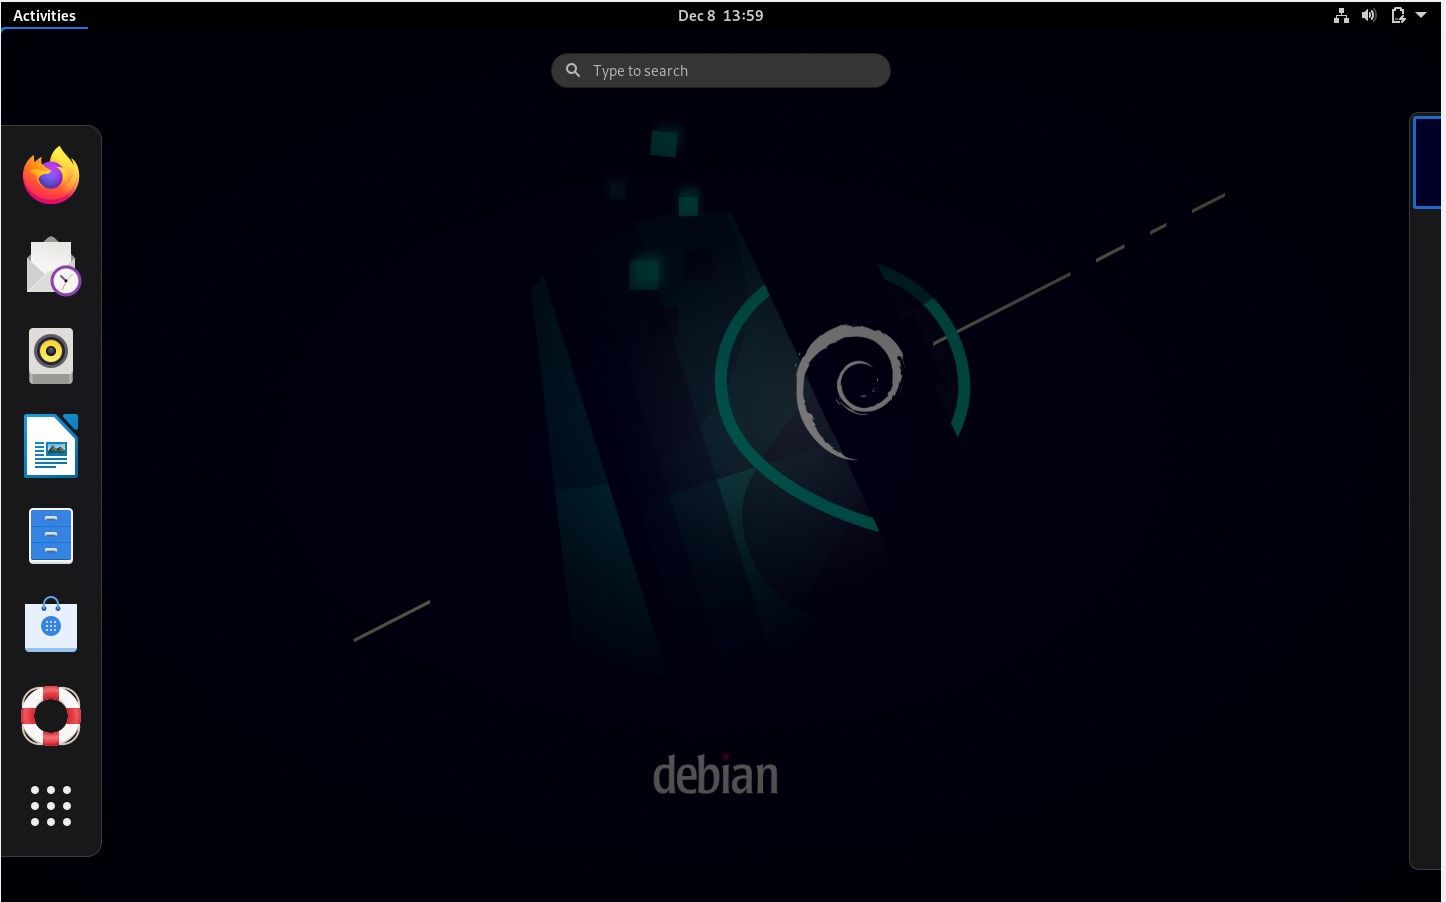 Debian Linux desktop with icons